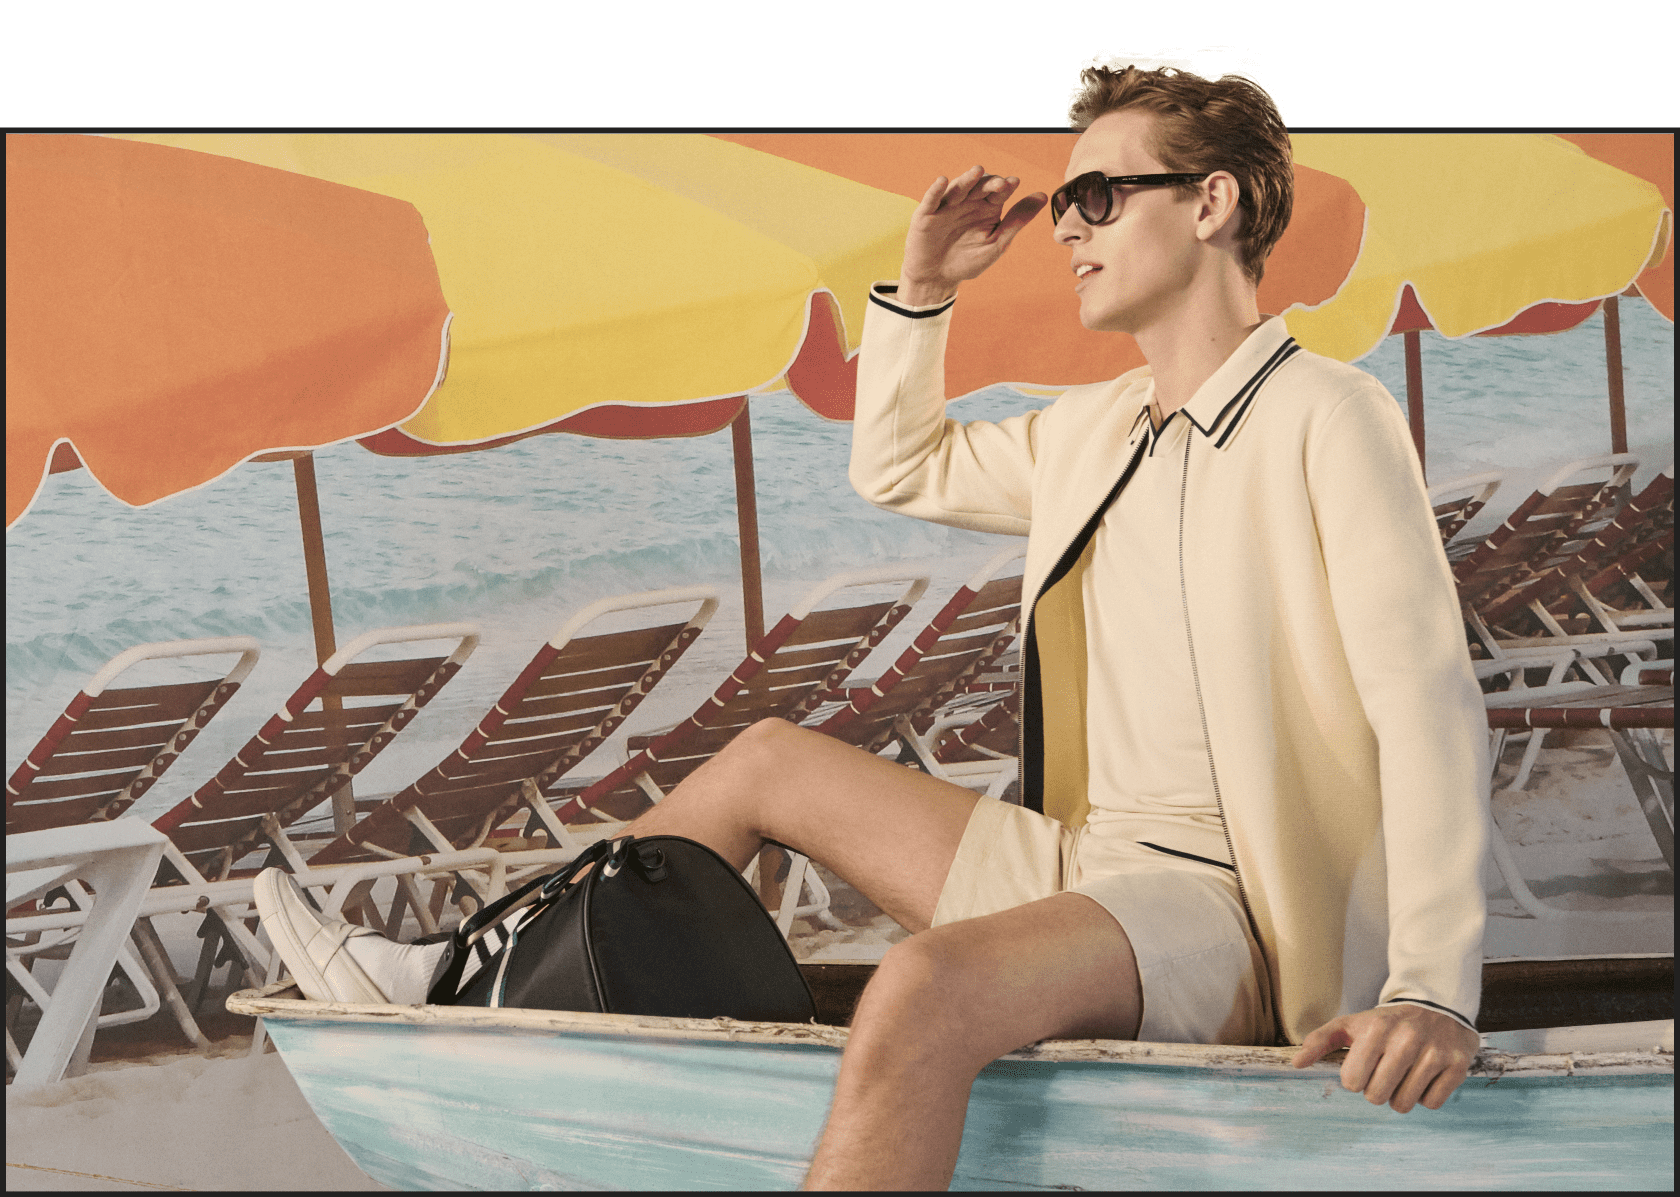 Man on a red print deck chair wearing sunglasses, cream zip up knit top with cream shorts and black holdall